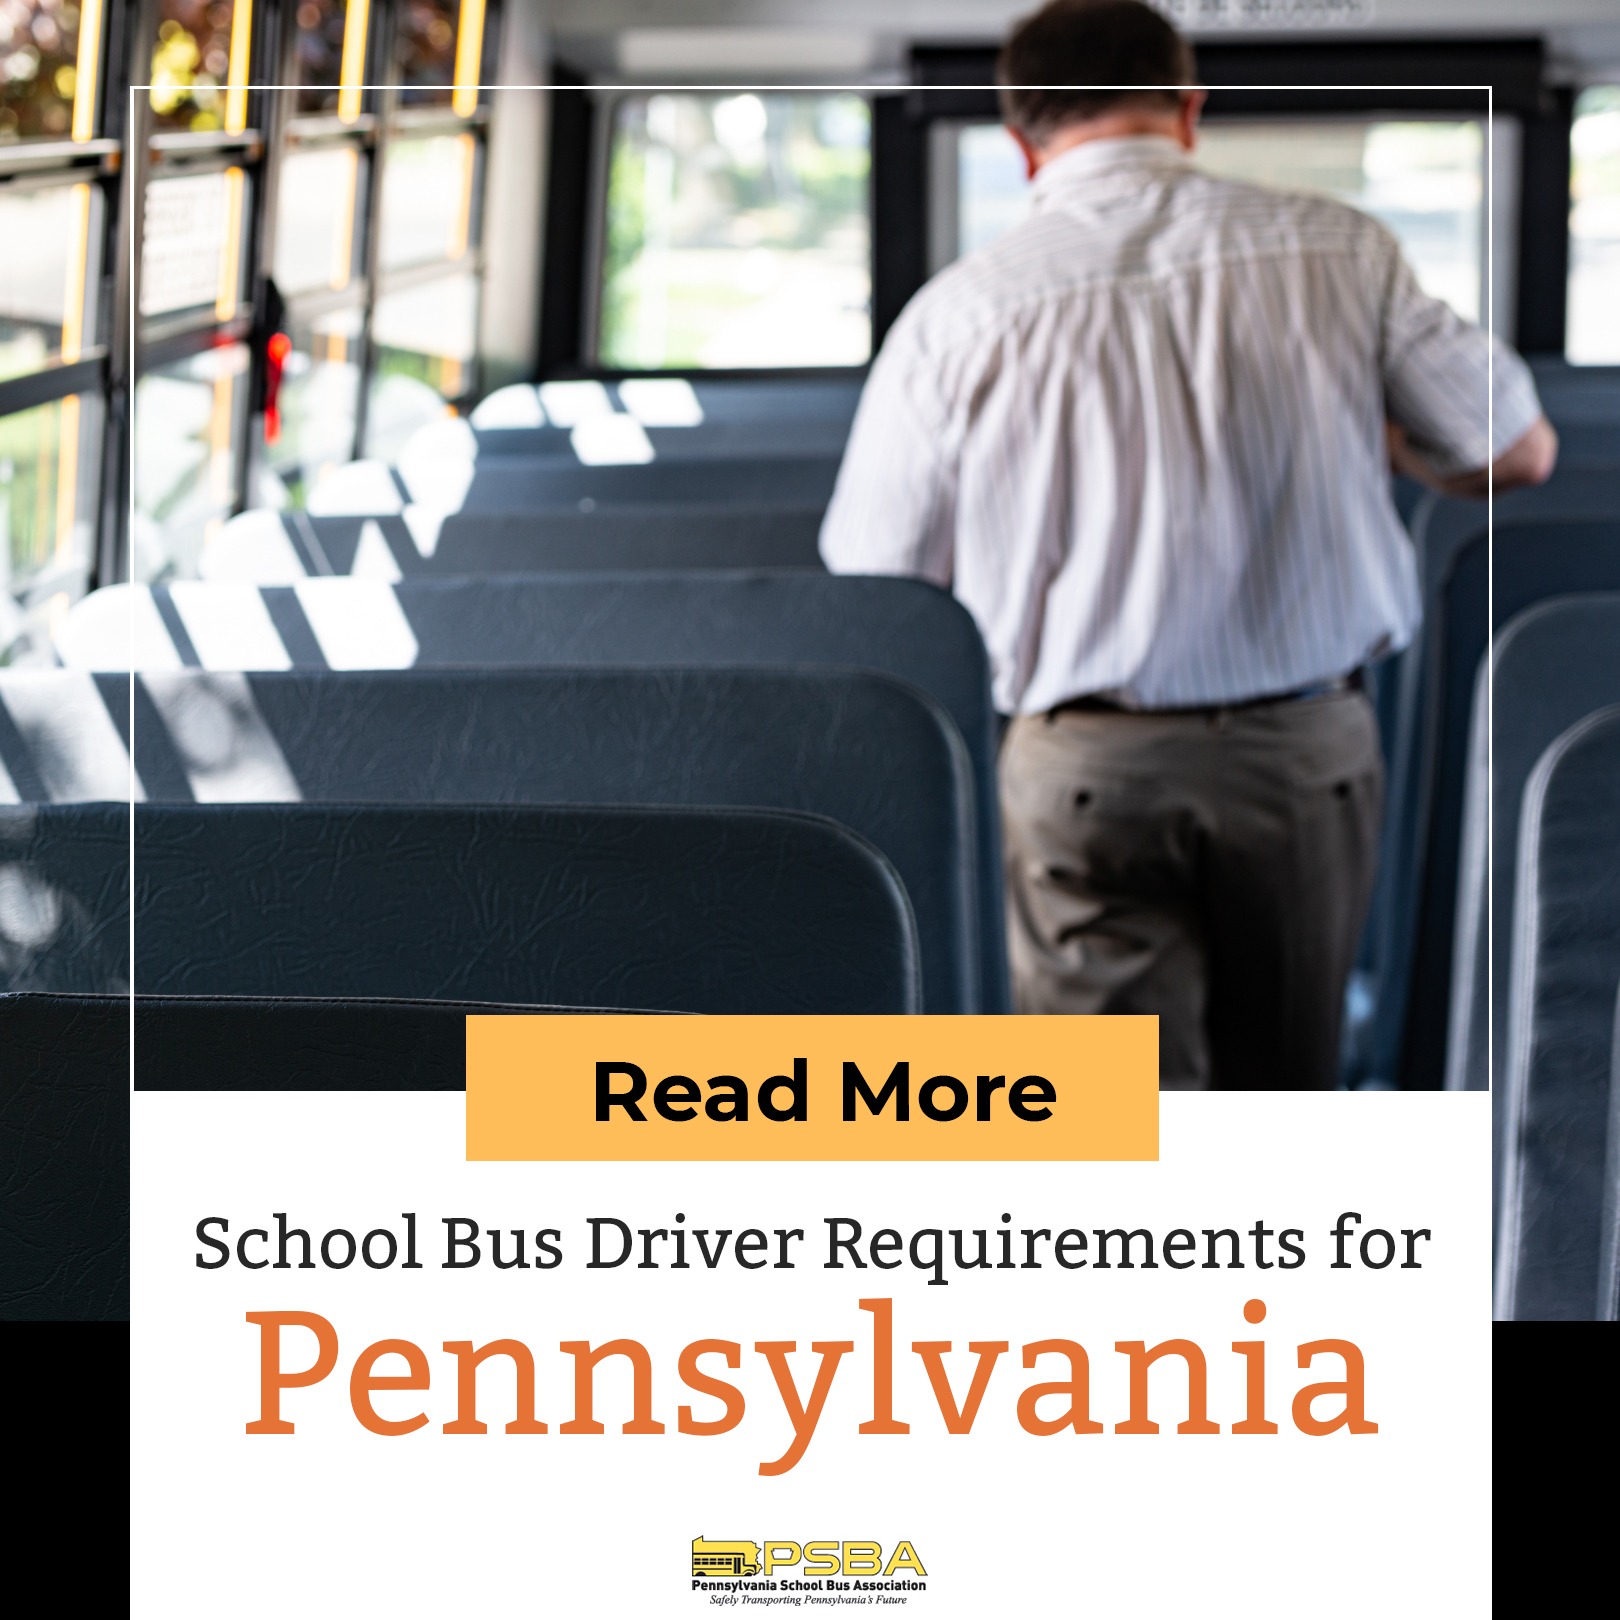 School Bus Driver Requirements for Pennsylvania